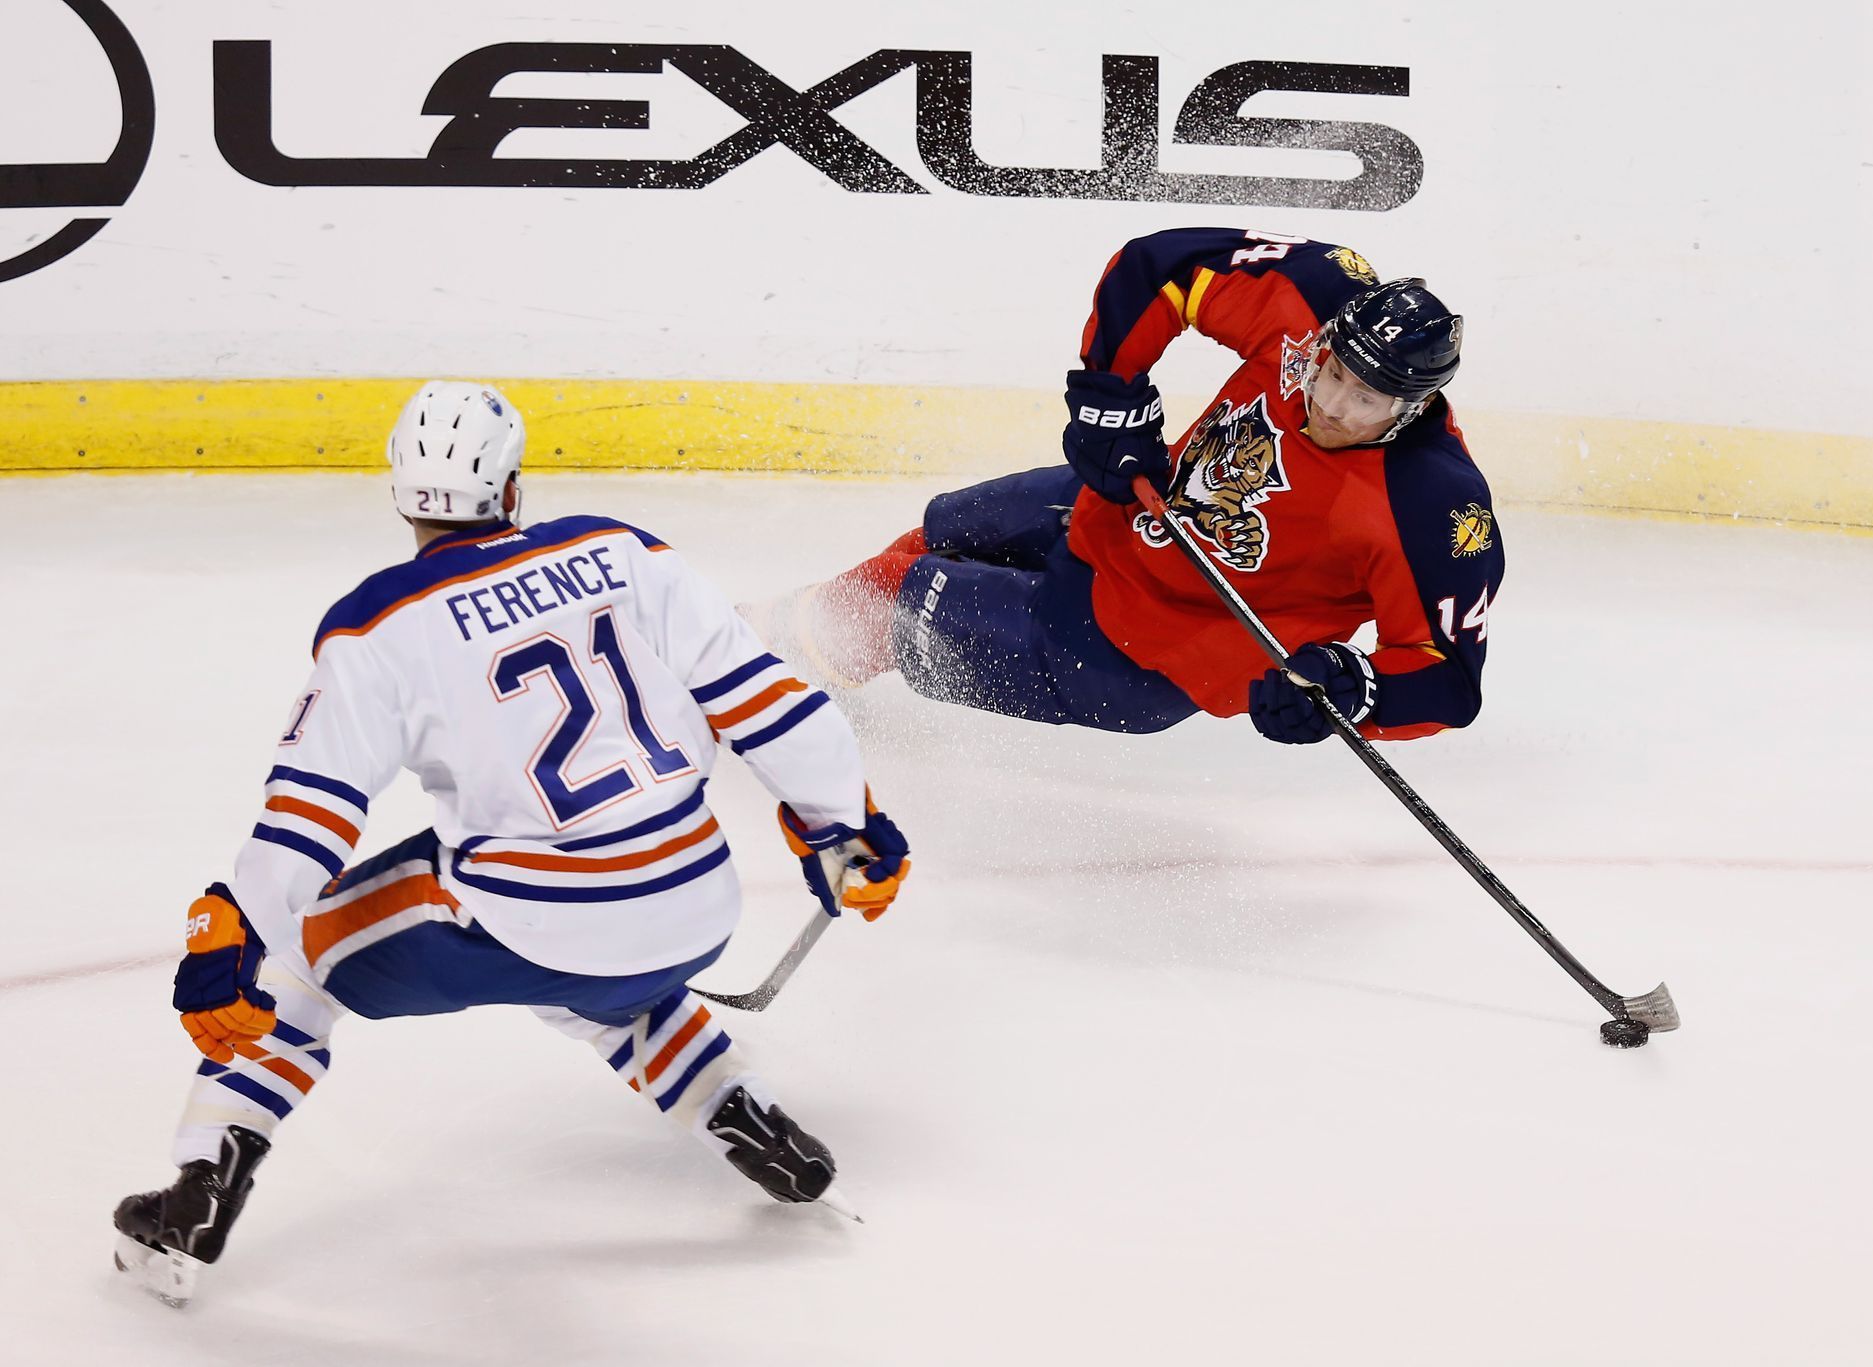 NHL: Edmonton Oilers at Florida Panthers (Fleischmann a Ference)